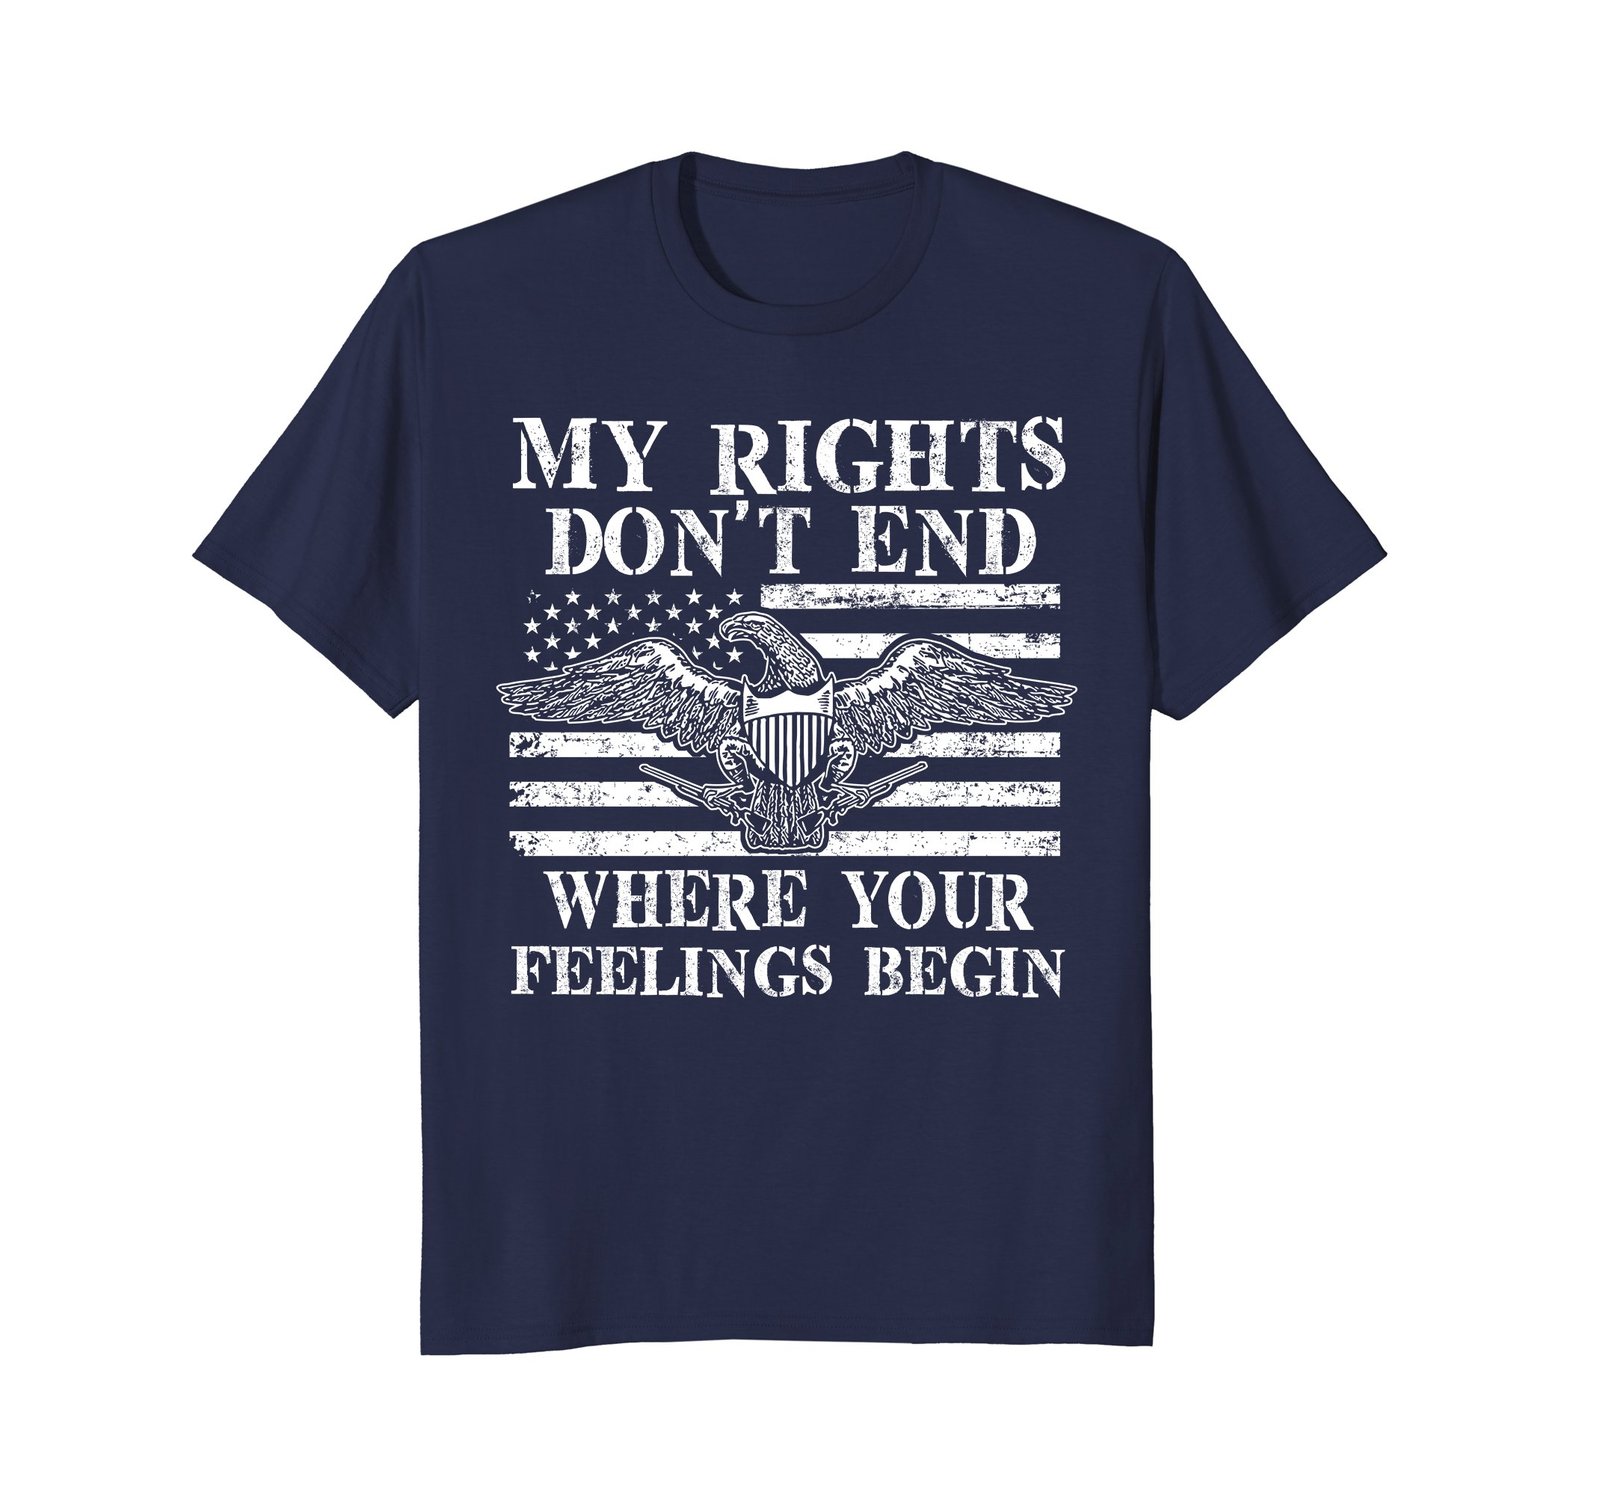 Funny Shirts - My Rights Don't End Where Your Feelings Begin T-Shirt Men